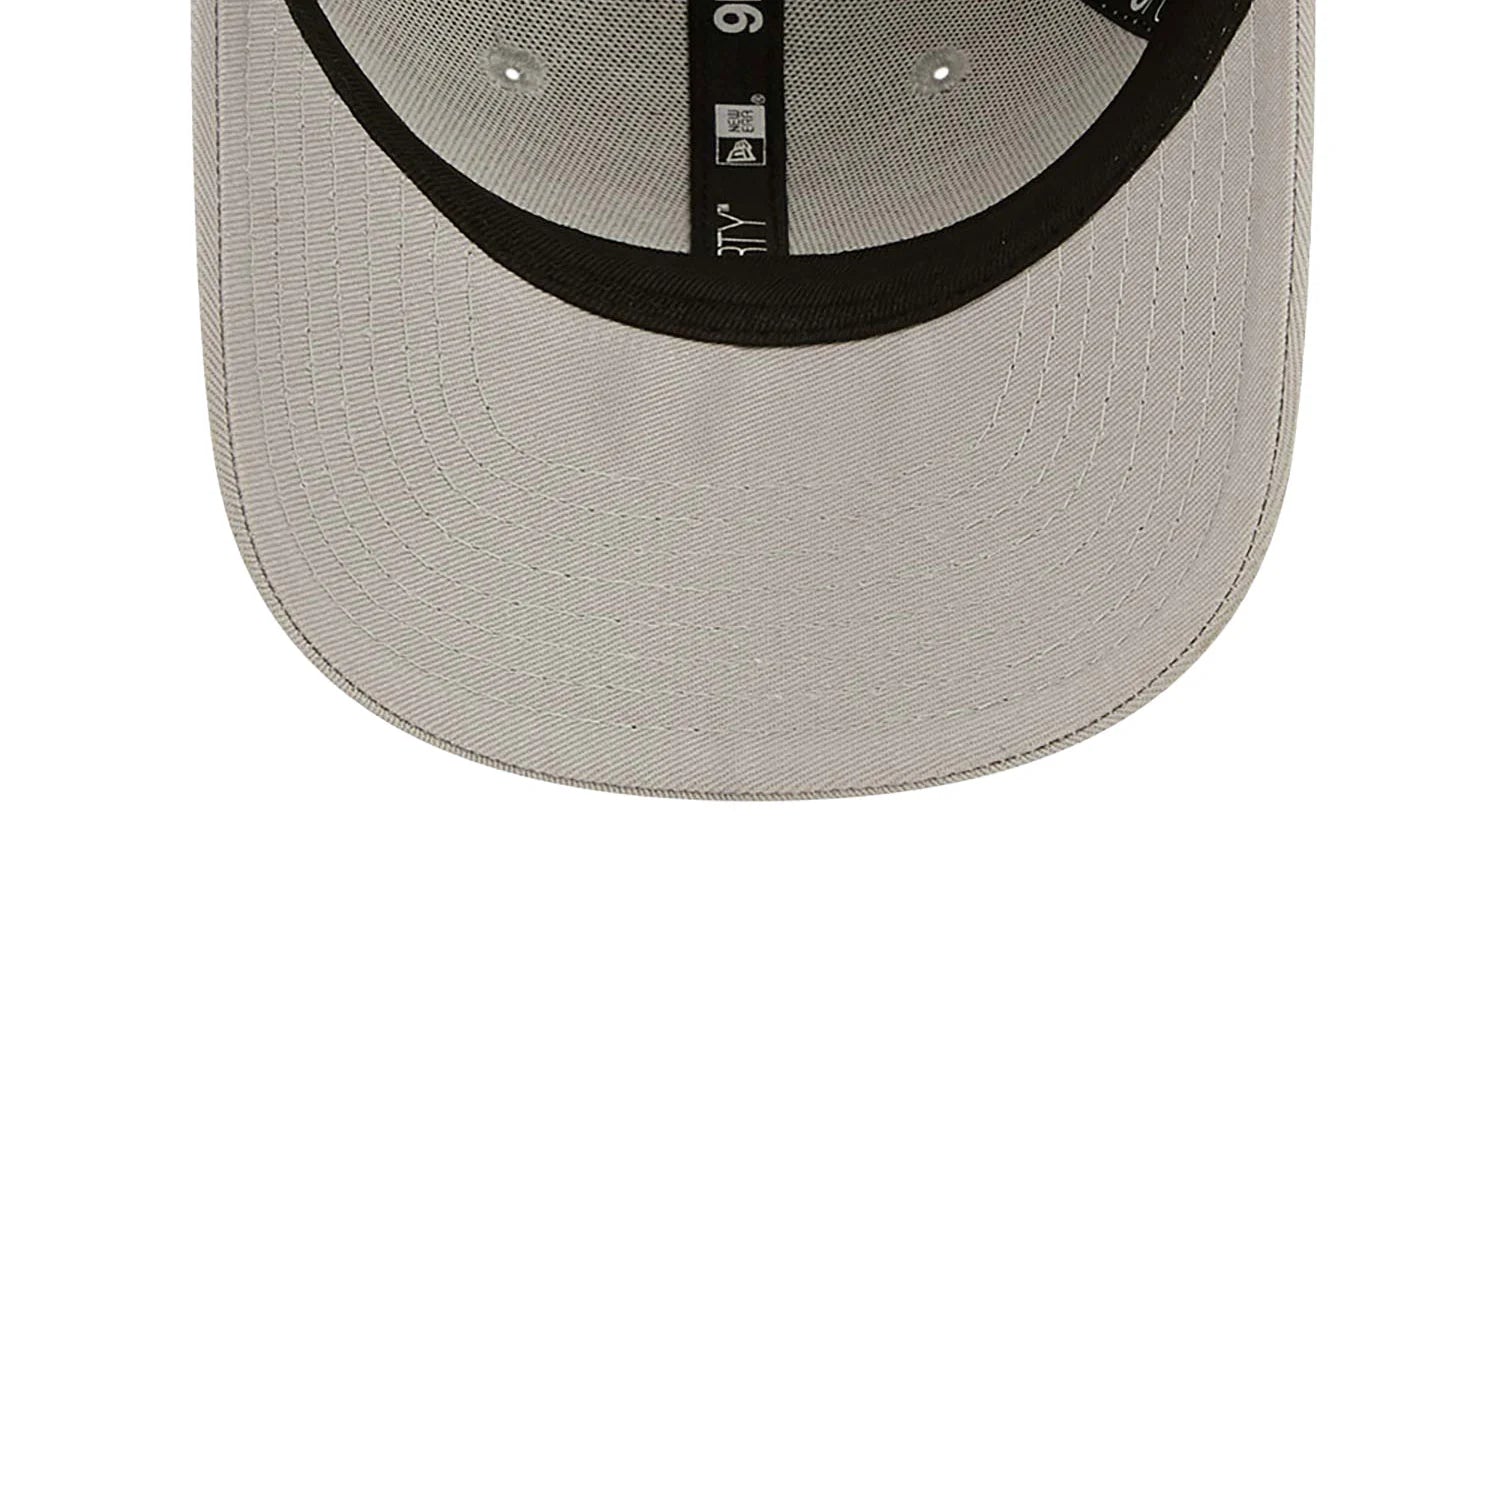 9Forty Child/Youth League Essential - Chicago White Sox Grey/Grey Heather